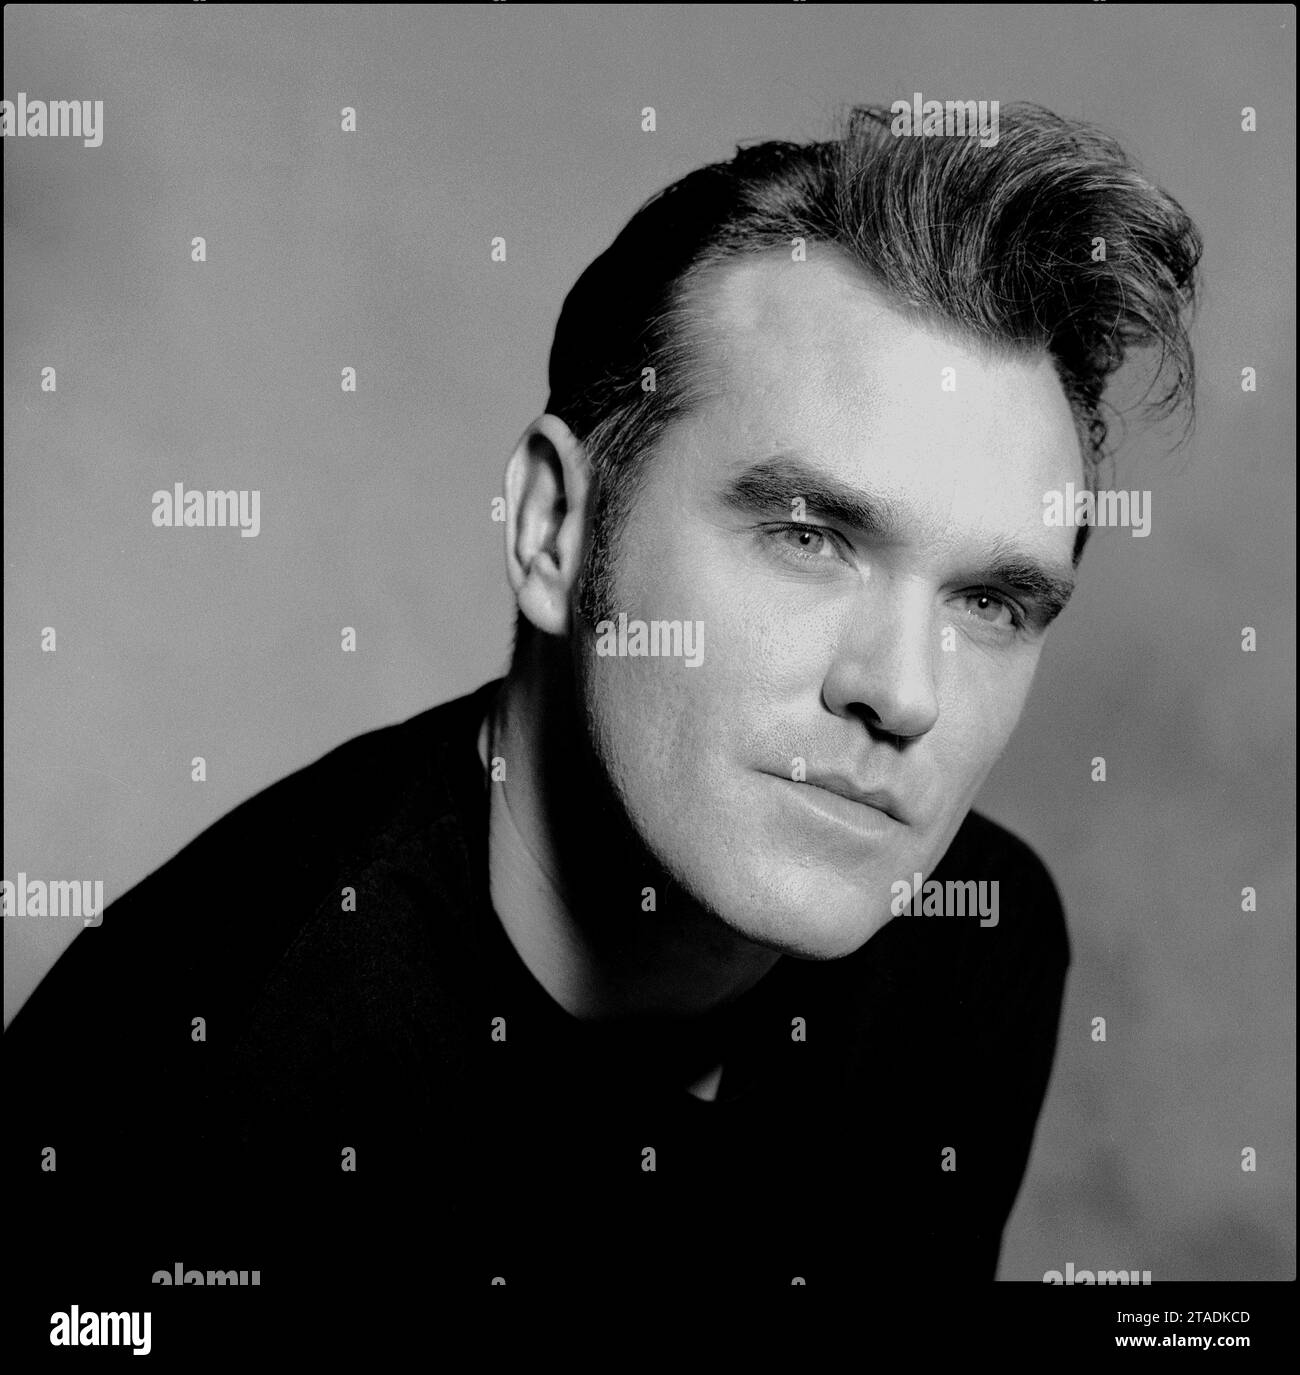 Black & white head & shoulders portrait of legendary rockstar, singer/songwriter Morrissey to promote his single “Sunny” in 1995 for Parlophone Records. It is a variation of the iconic image used by Morrissey on his Penguin Classics book cover “Autobiography”. Stock Photo